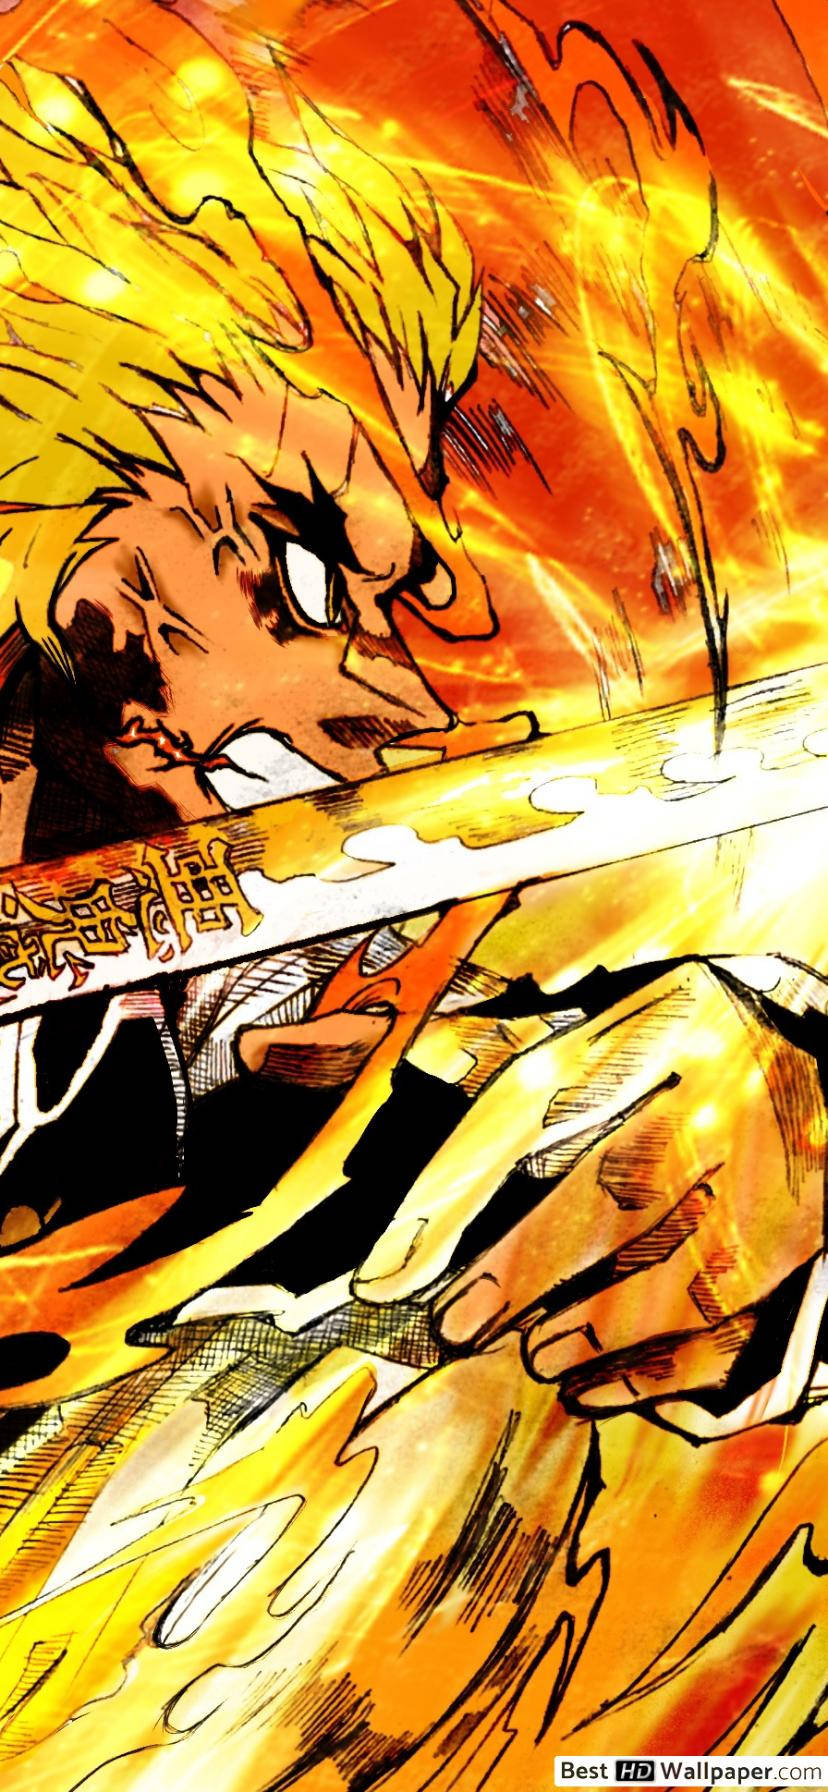 Rengoku attacking with his flame breathing wallpaper.